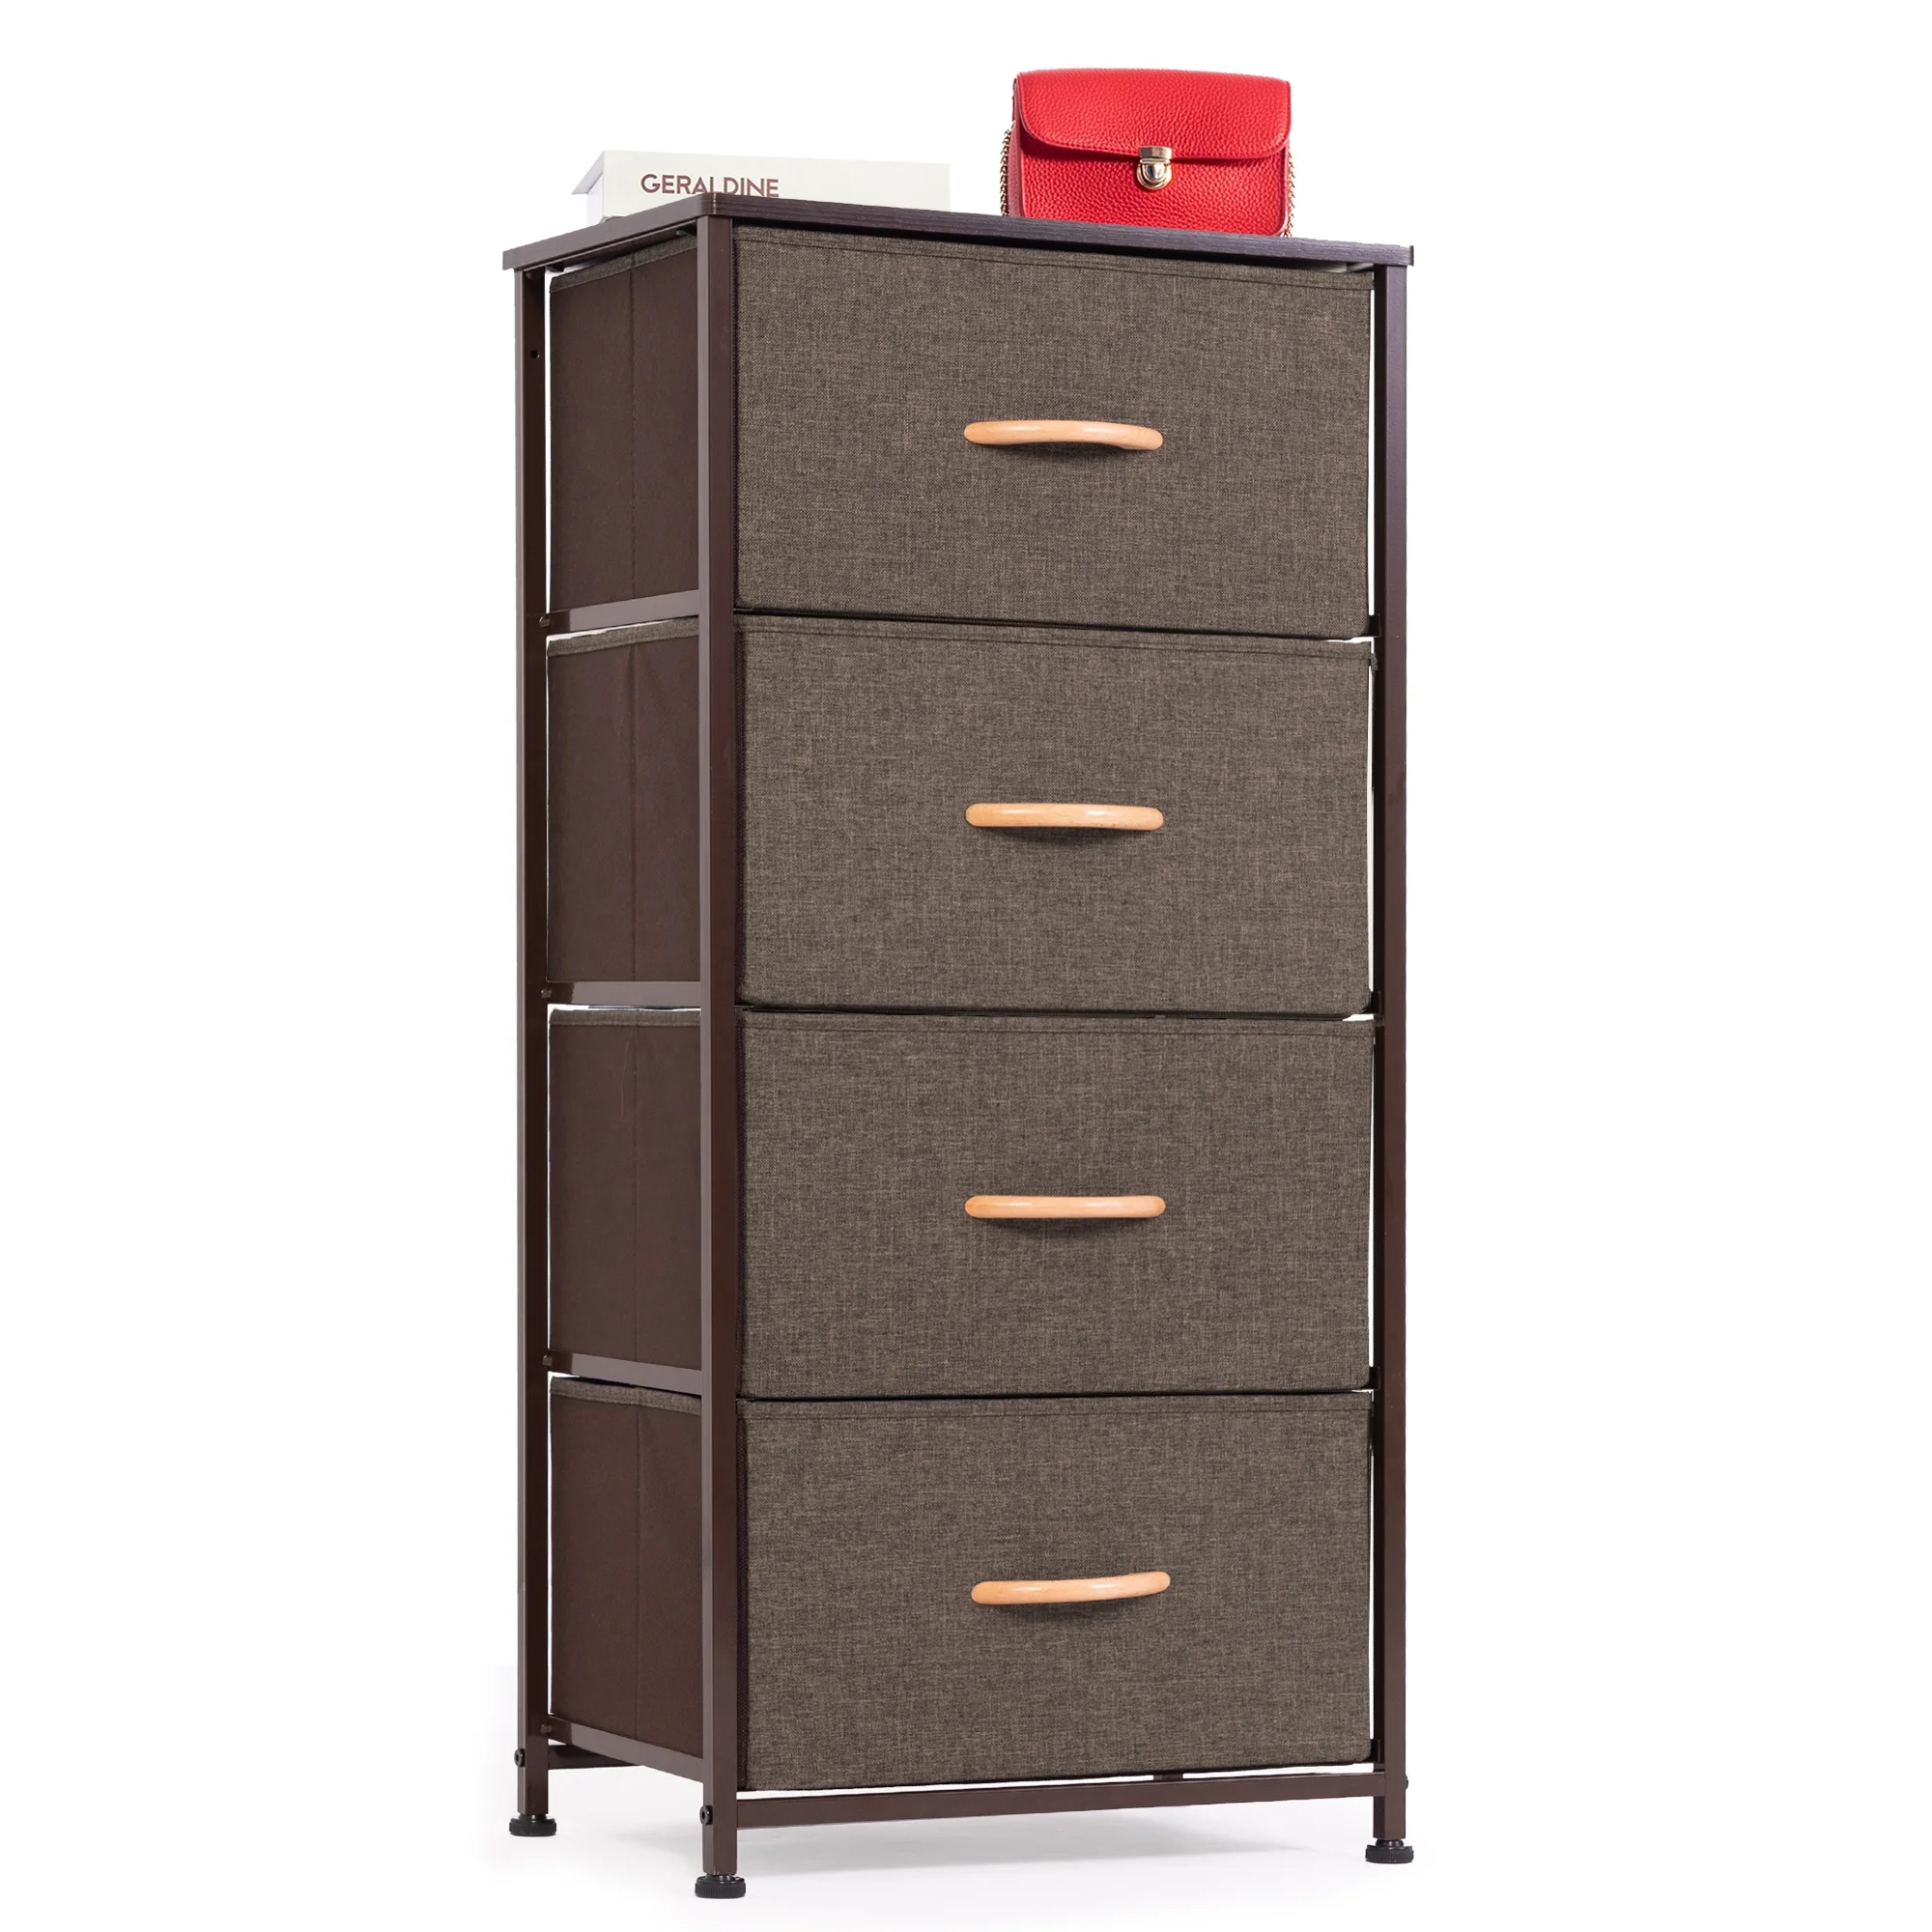 

Three Colors Suitable Vertical Dresser Storage Tower with 4 Drawers, Fabric Organizer Dresser Tower for Bedroom